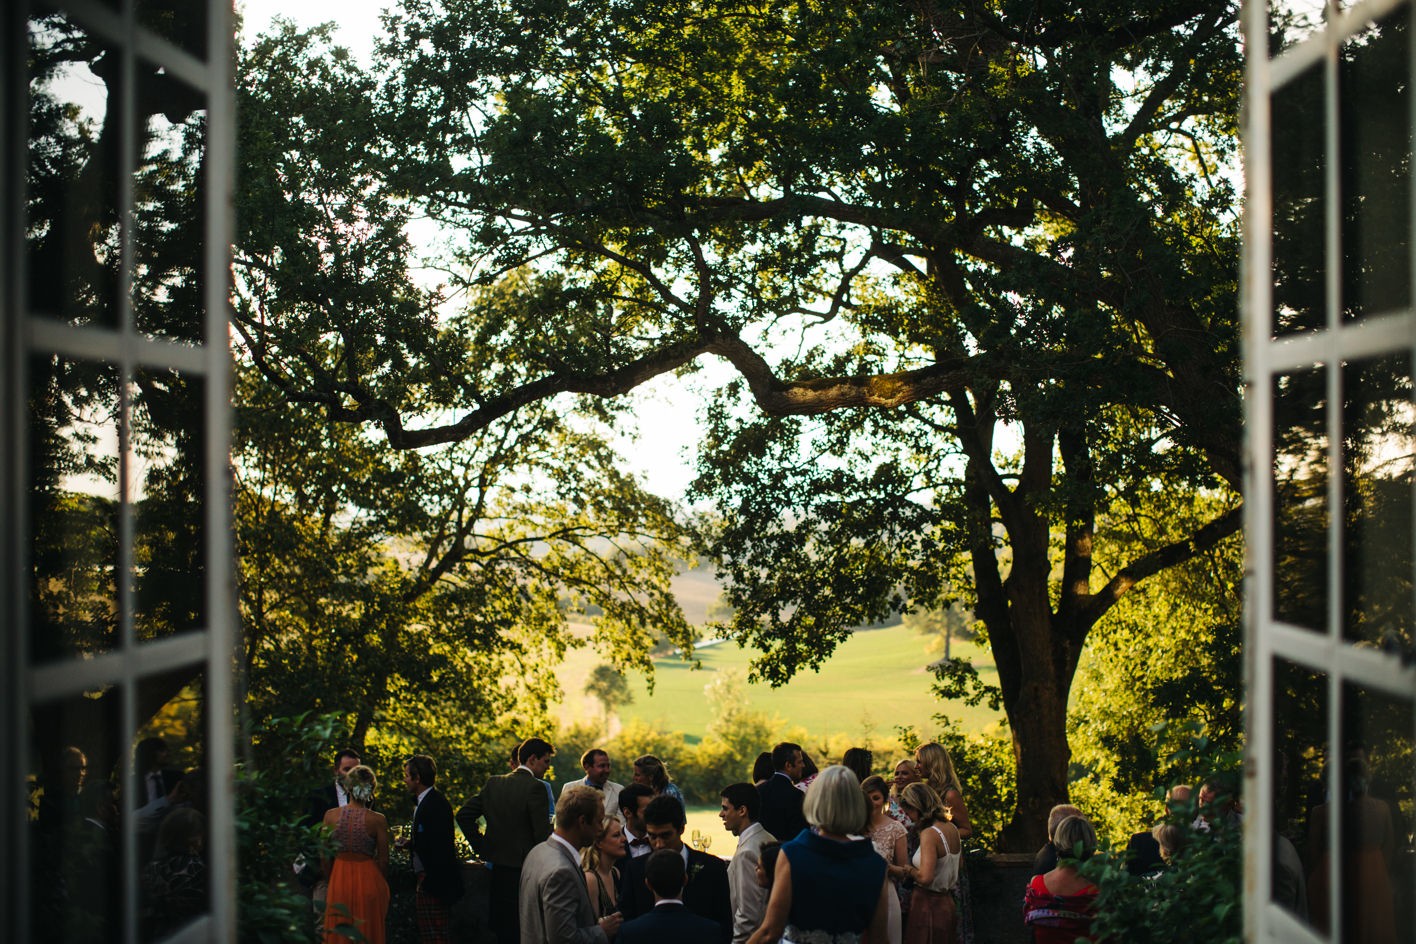 View of guests mingling at wedding drinks reception from window with trees in background